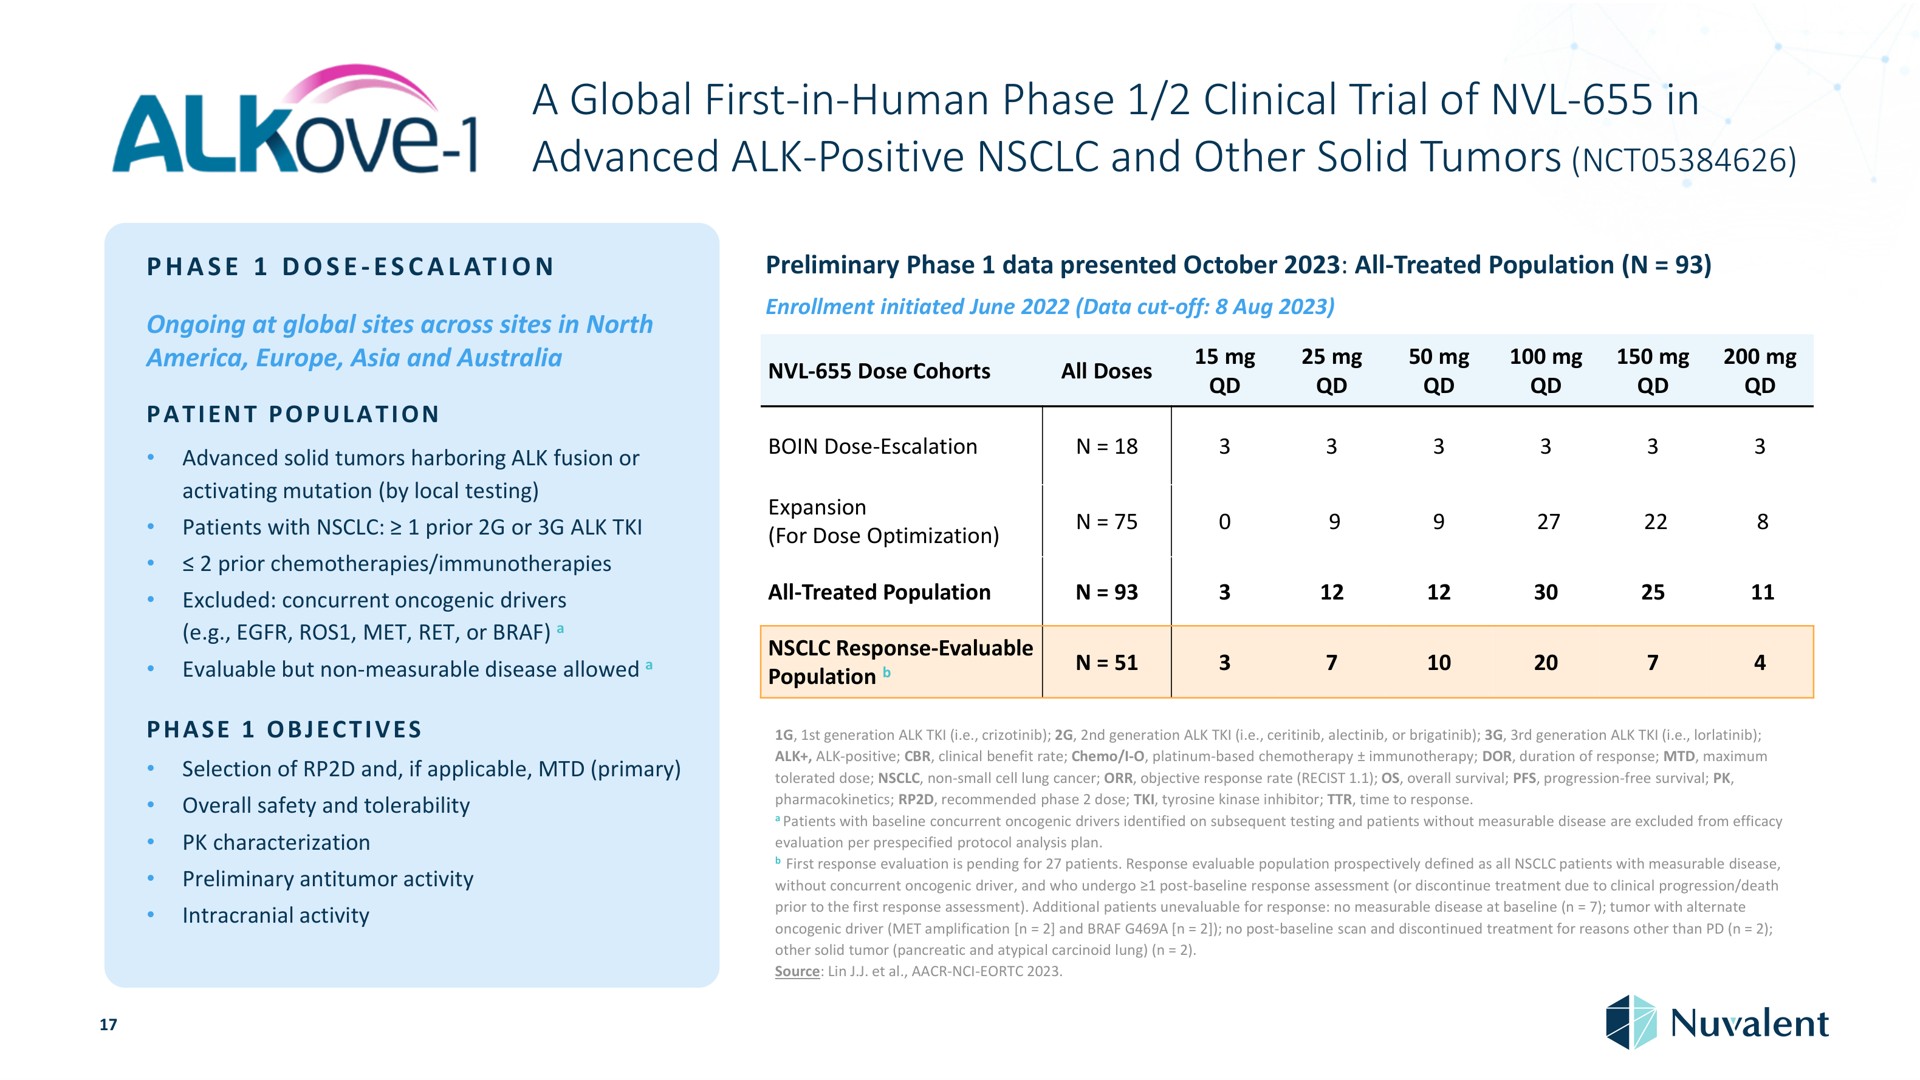 a global first in human phase clinical trial of in advanced alk positive and other solid tumors dose preliminary data presented all treated population ongoing at sites across sites north patient population harboring alk fusion or activating mutation by local testing patients with prior or alk prior chemotherapies excluded concurrent drivers met ret or valuable but non measurable disease allowed objectives selection if applicable primary overall safety tolerability characterization preliminary activity intracranial activity enrollment initiated june data cut off dose cohorts all doses dose expansion for dose optimization all treated population response evaluable population generation alk i generation alk i or generation alk i alk benefit rate i platinum based chemotherapy dor duration response maximum tolerated dose non small cell lung cancer objective response rate overall survival progression free survival recommended dose tyrosine kinase inhibitor time to response patients with concurrent drivers identified on subsequent testing patients without measurable disease are excluded from efficacy evaluation per protocol analysis plan first response evaluation is pending for patients response evaluable population prospectively defined as all patients with measurable disease without concurrent driver who undergo post response assessment or discontinue treatment due to progression death prior to the first response assessment additional patients for response no measurable disease at tumor with alternate driver met amplification a no post scan discontinued treatment for reasons than tumor pancreatic atypical carcinoid lung source lin | Nuvalent